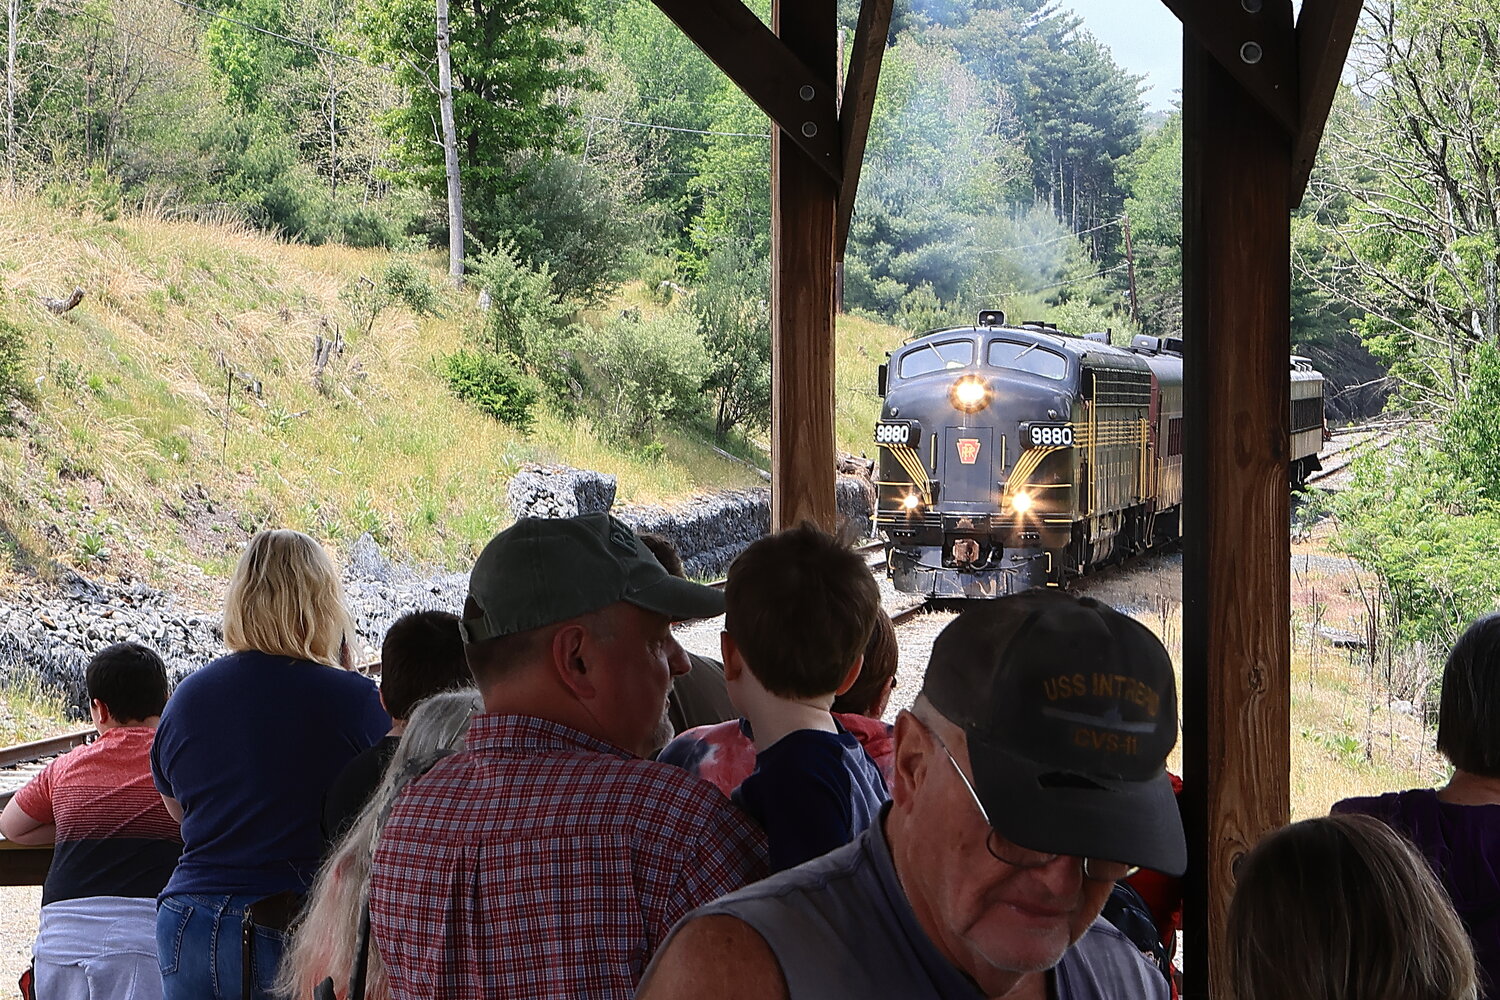 Pictured is the second of three train arrivals from Honesdale, PA on June 3, coming into the Hawley Station at the intersection of Columbus Avenue and Main Avenue around 1:30 p.m. Bringing a nearly full load of passengers, the train picked up almost an equal amount of riders to head back to the Honesdale Station on Commercial Street...